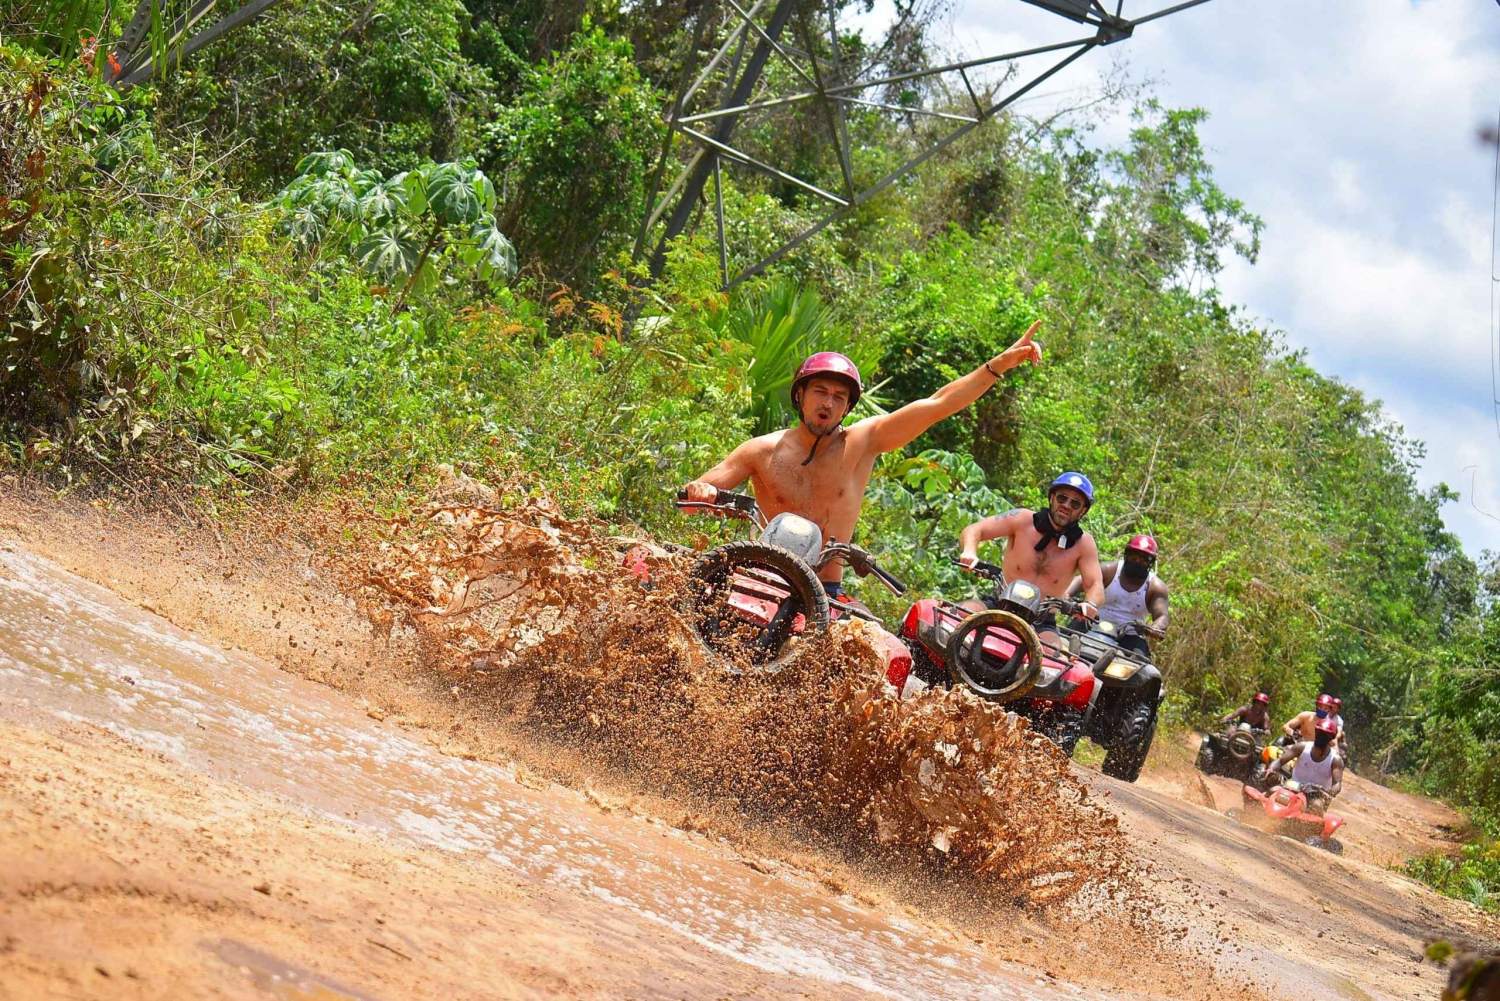 Extreme Cancun: Highlights Tour with ATV, Cenote & Ziplines